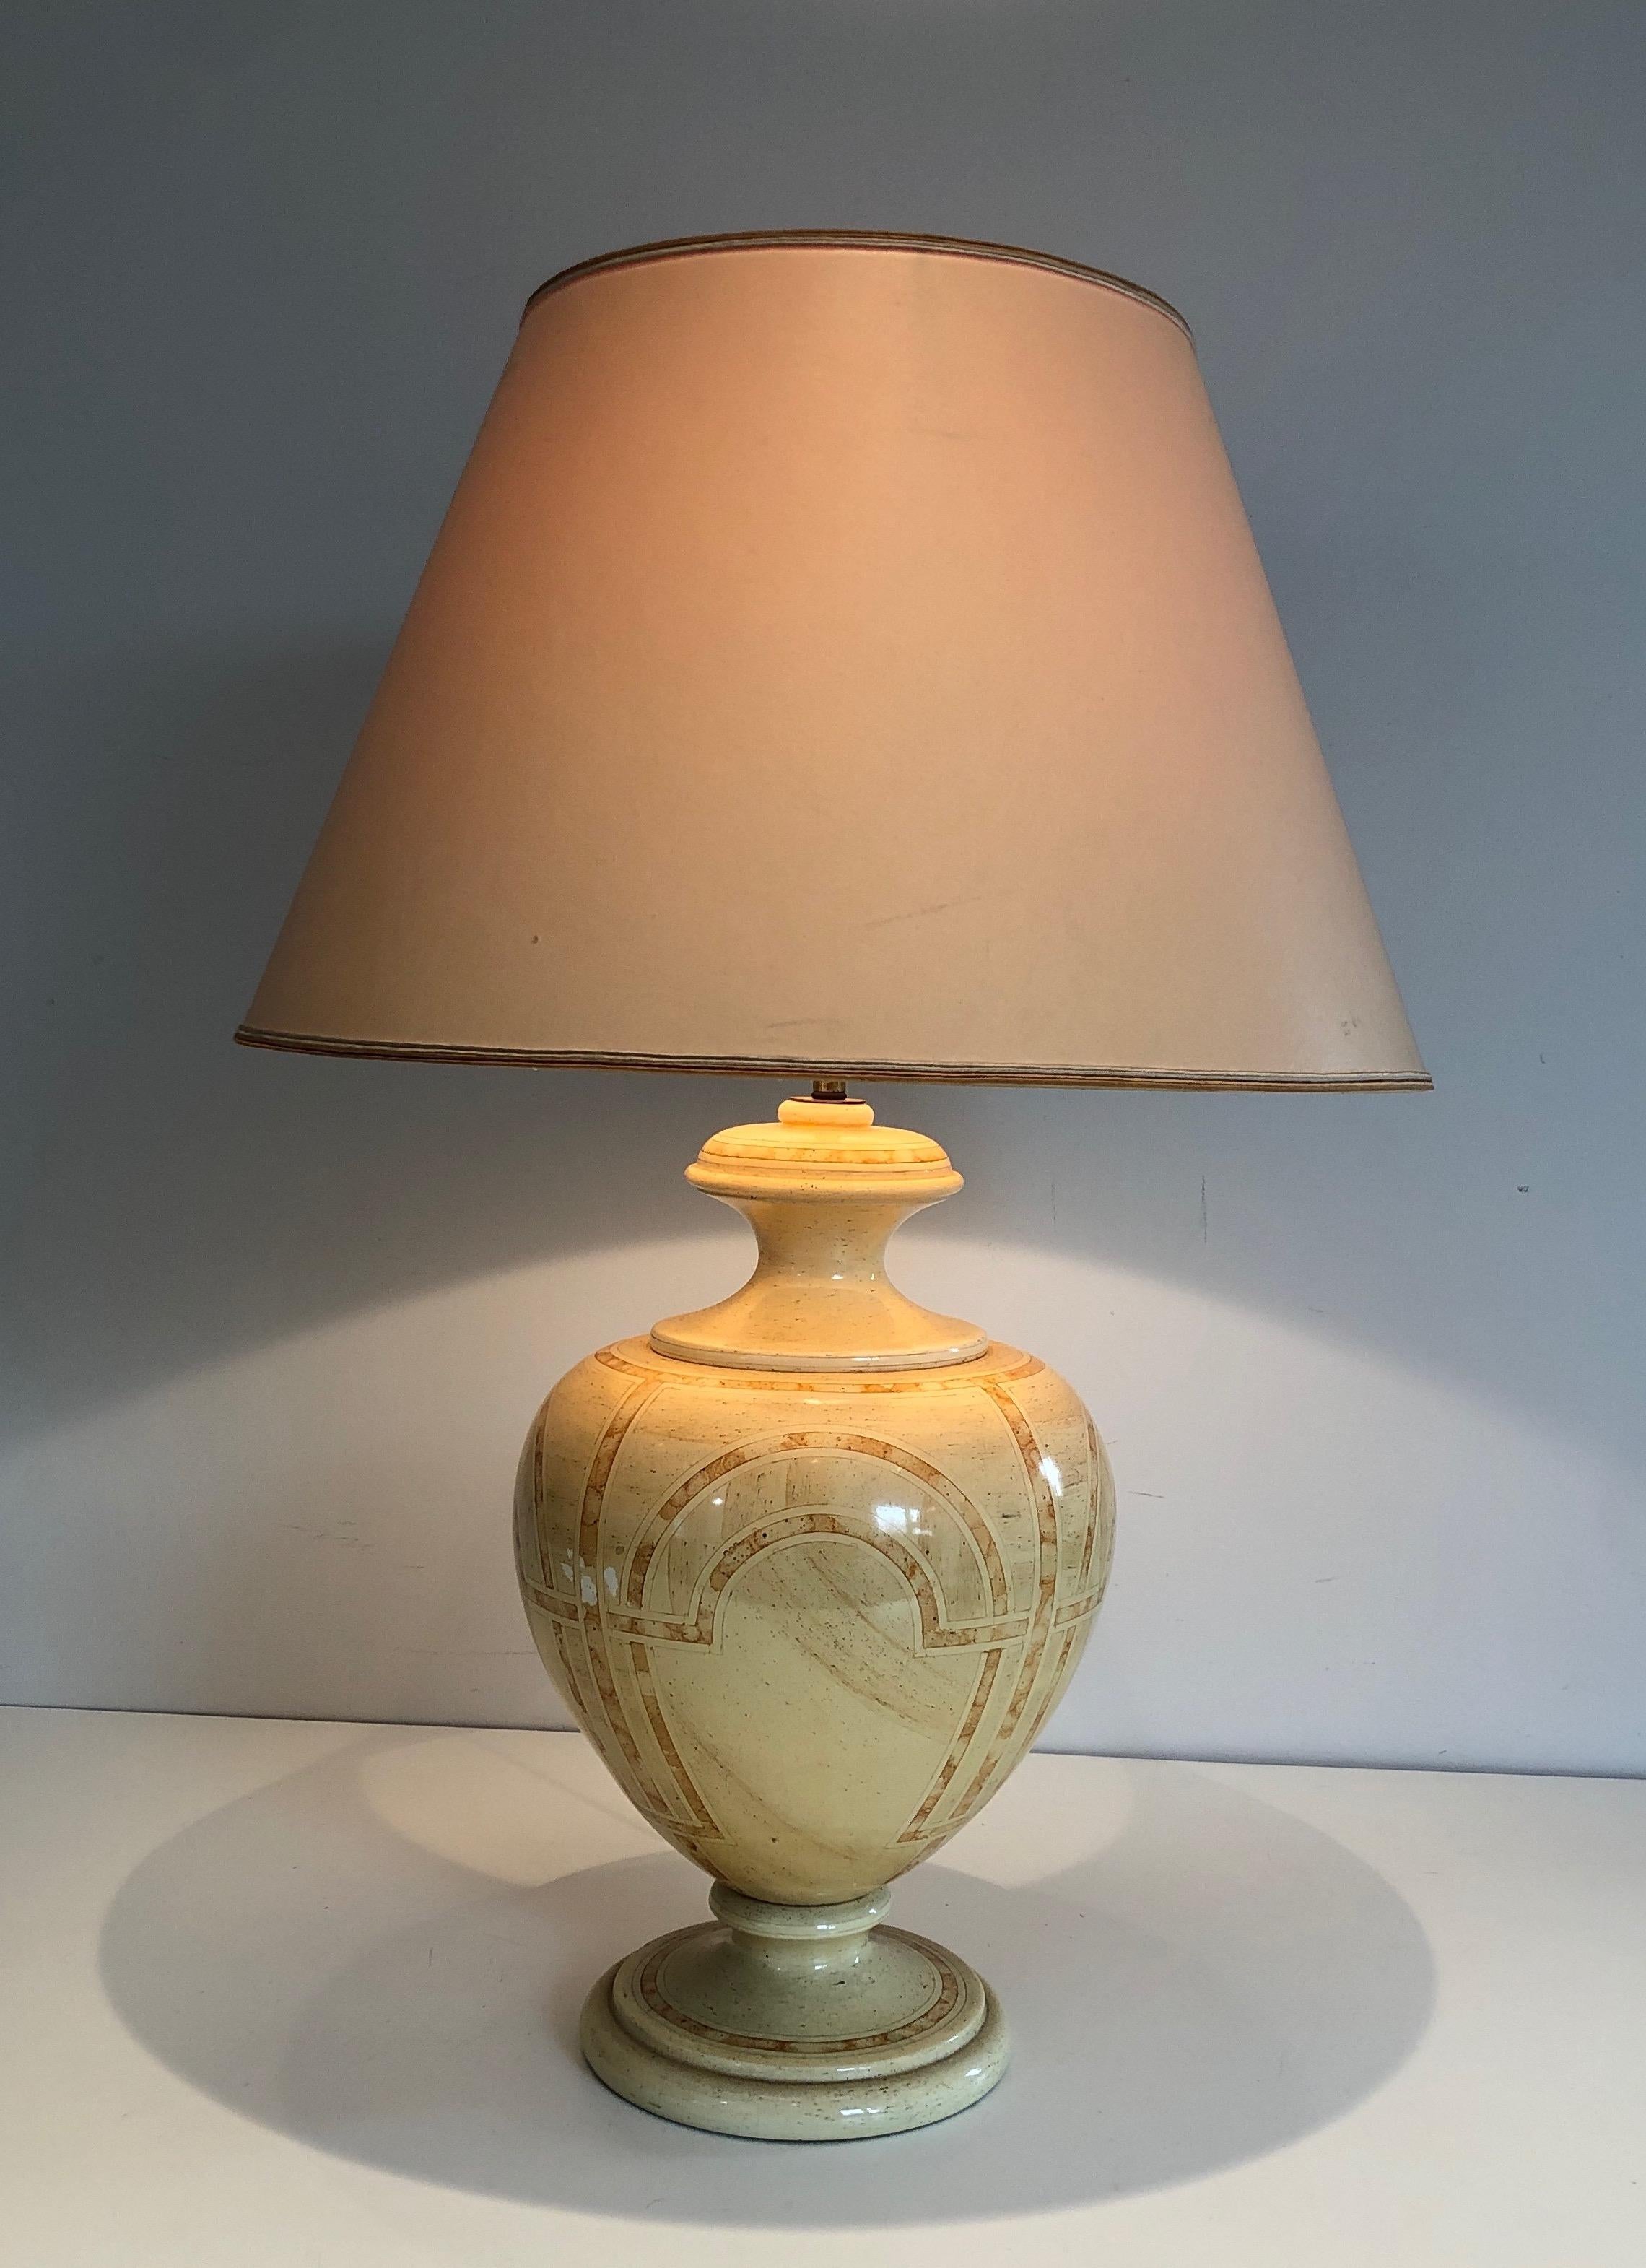 Neoclassical Eggshell Lacquered Table Lamp with Interlacing Decors, French Work, circa 1970 For Sale